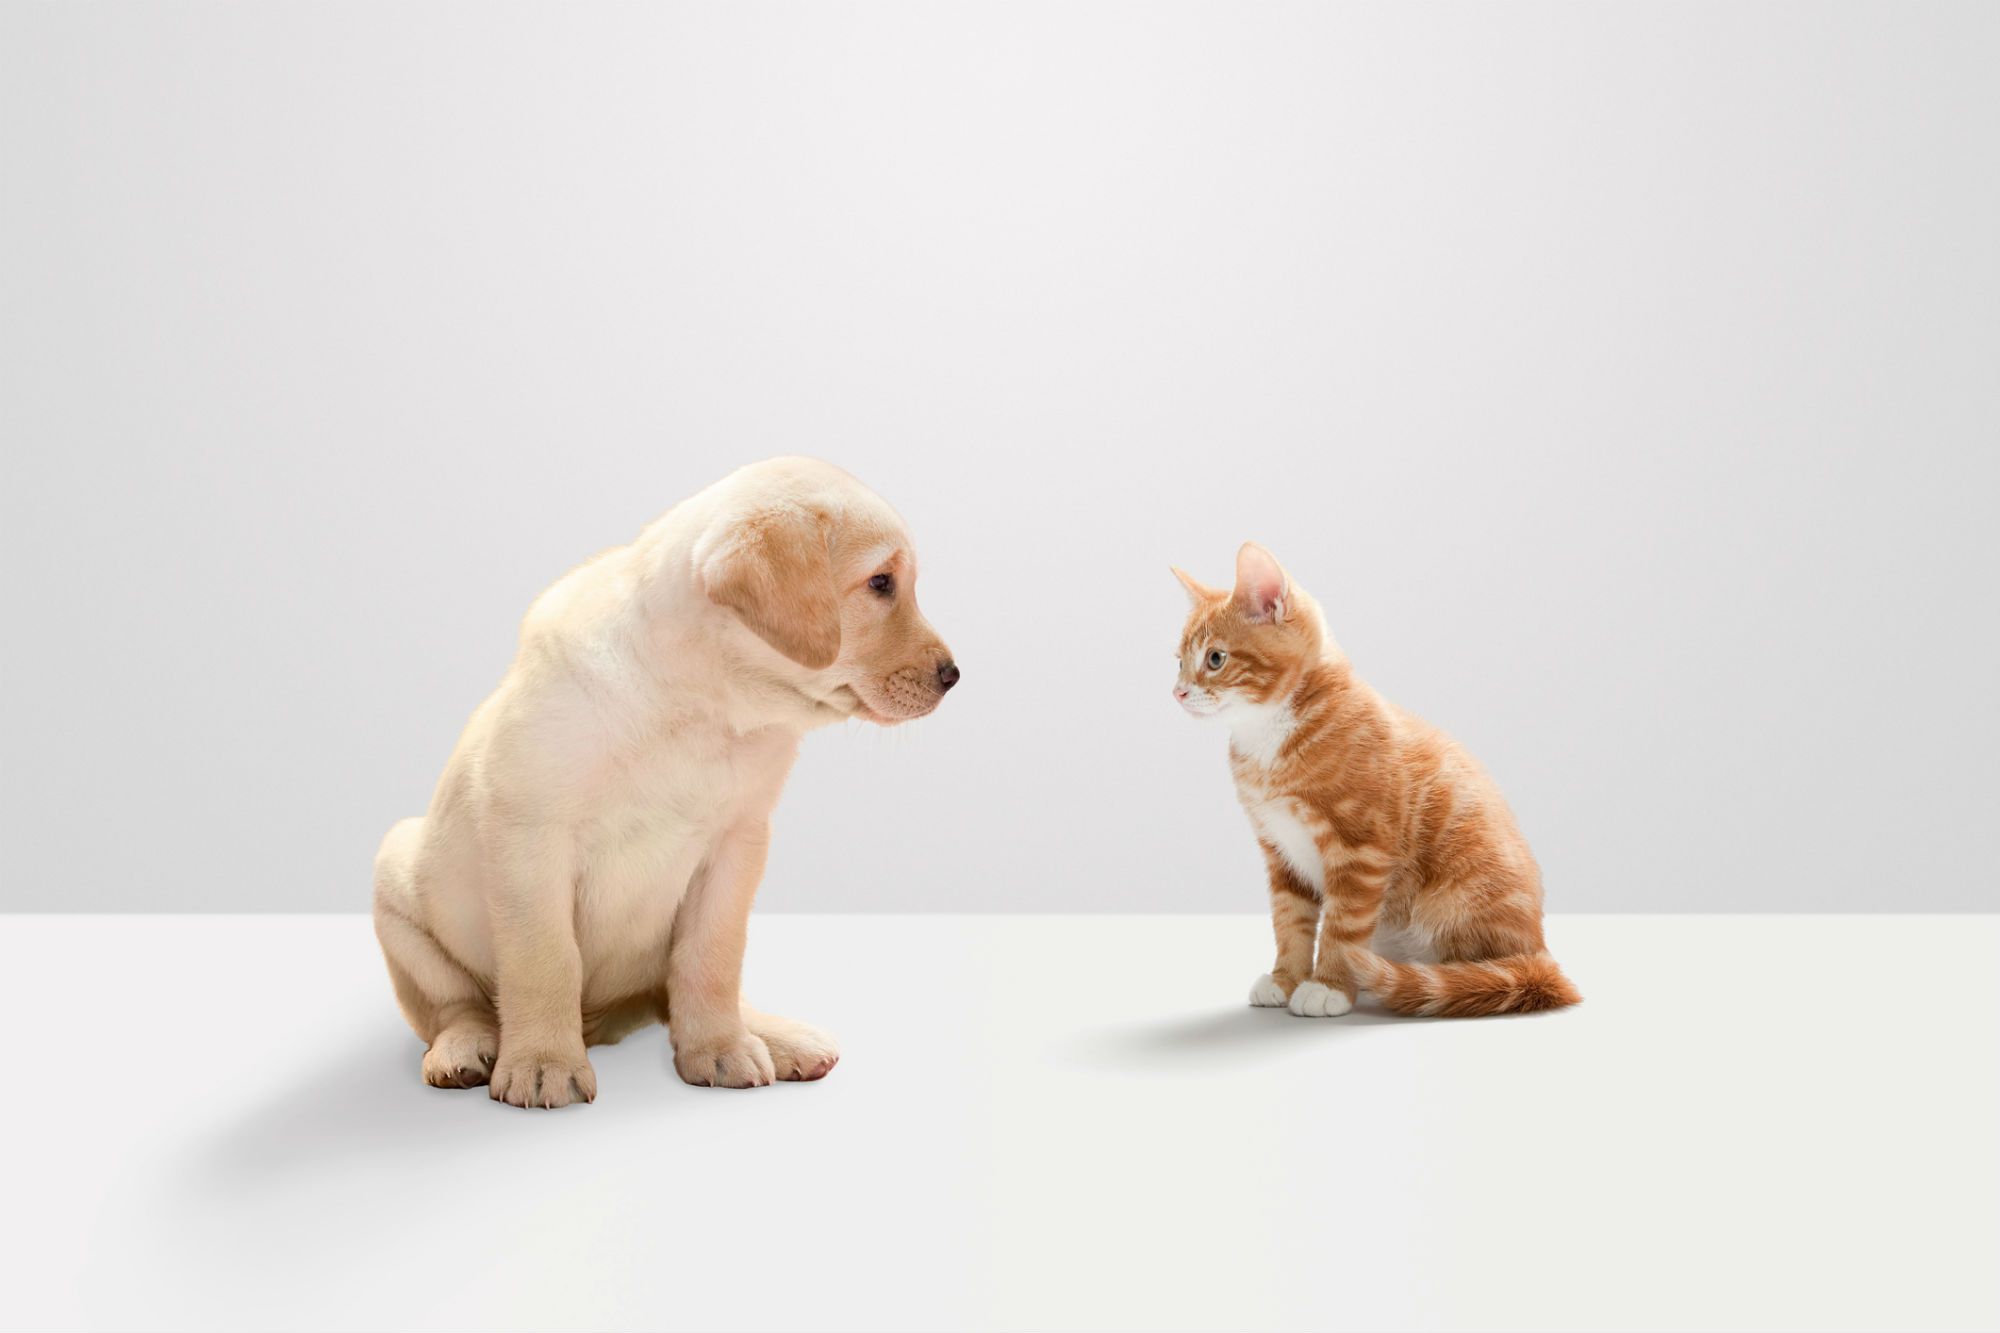 Kittens vs Puppies: 10 Reasons Puppies Are Better